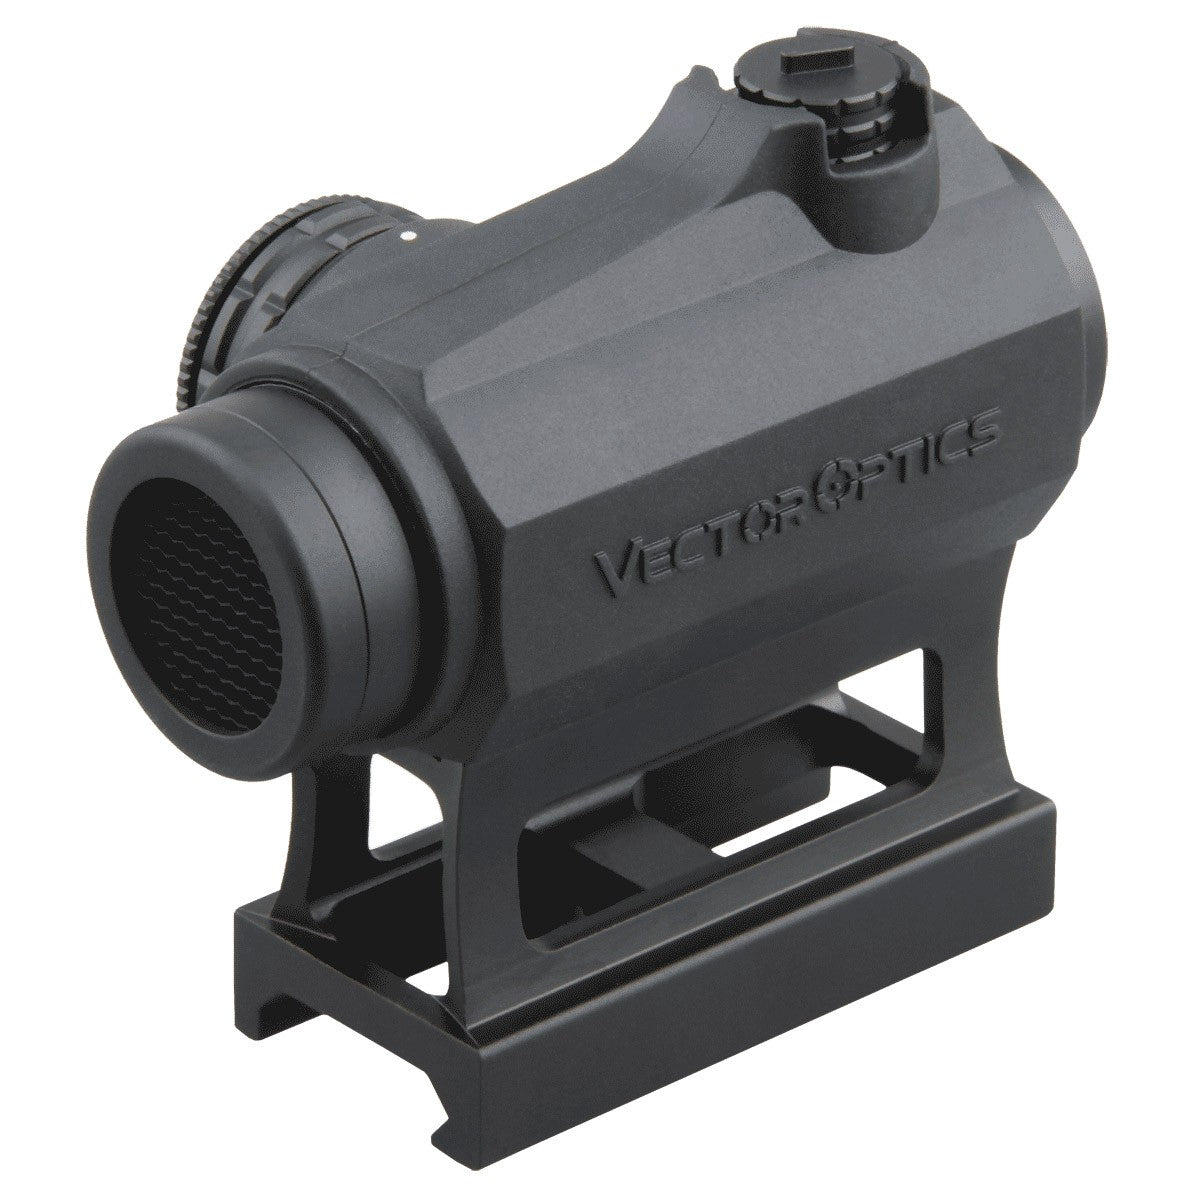 The Most Picked Tube Style Red Dot Sight | Vector Optics - Vector 